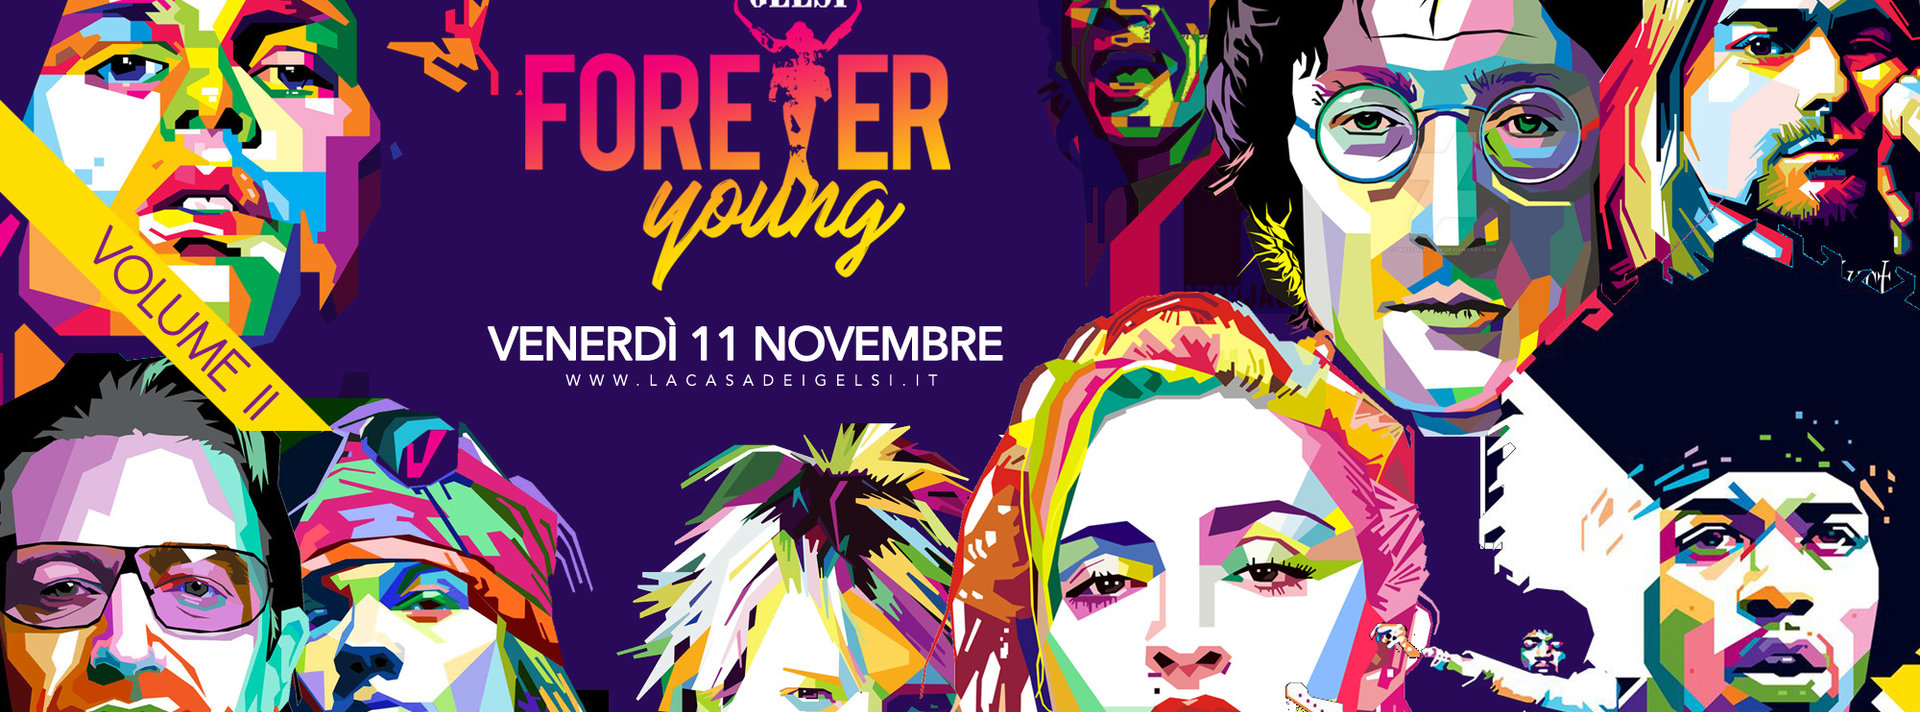 Forever young gelsi 11 novembre 2016